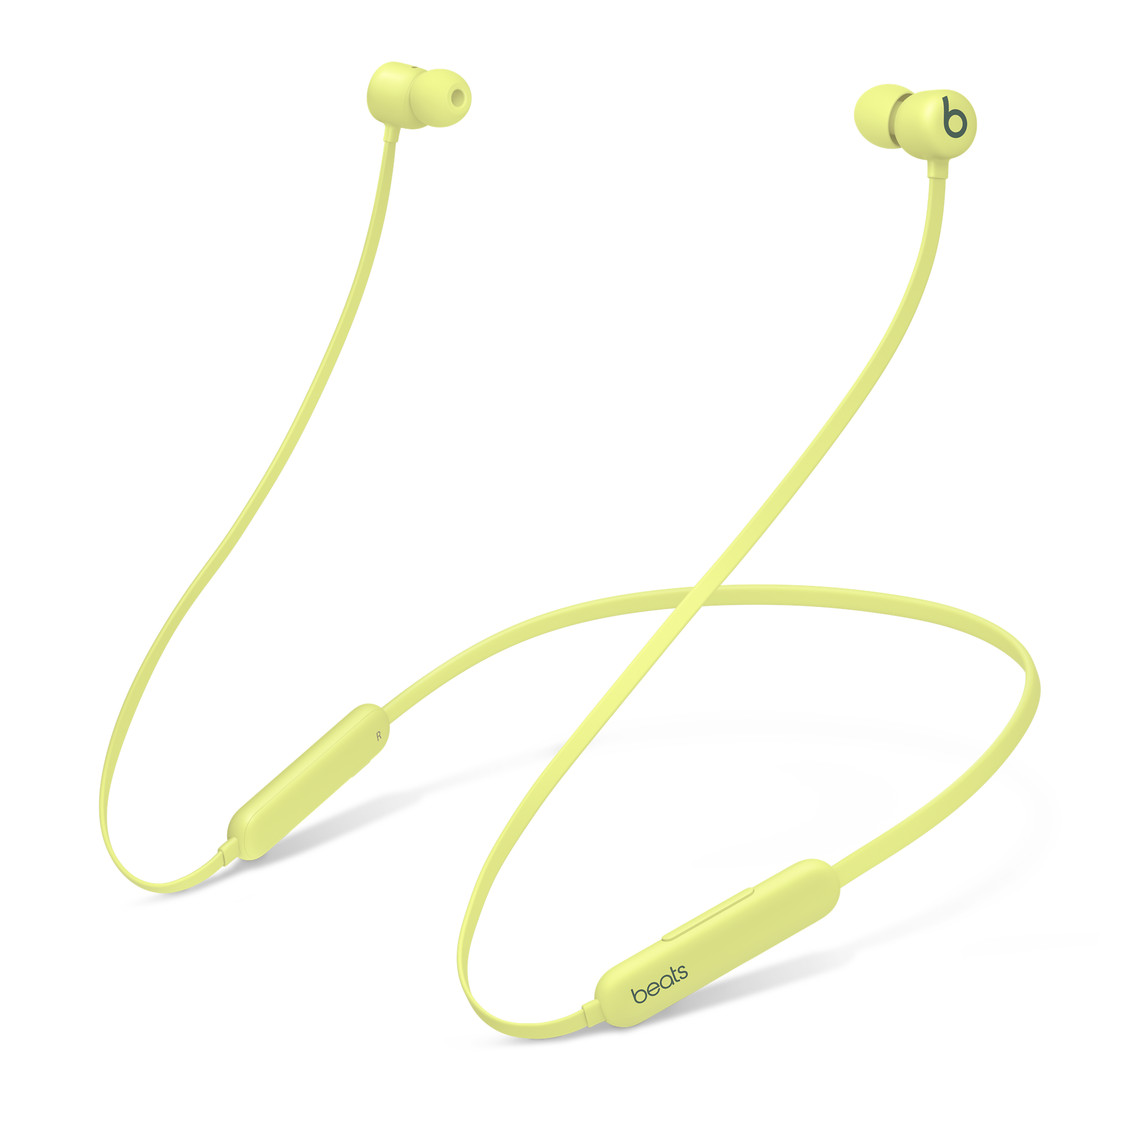 Beats Flex All-Day Wireless Earphones, in Yuzu Yellow, feature a dual-chamber acoustic design to achieve outstanding stereo separation with rich and precise bass.